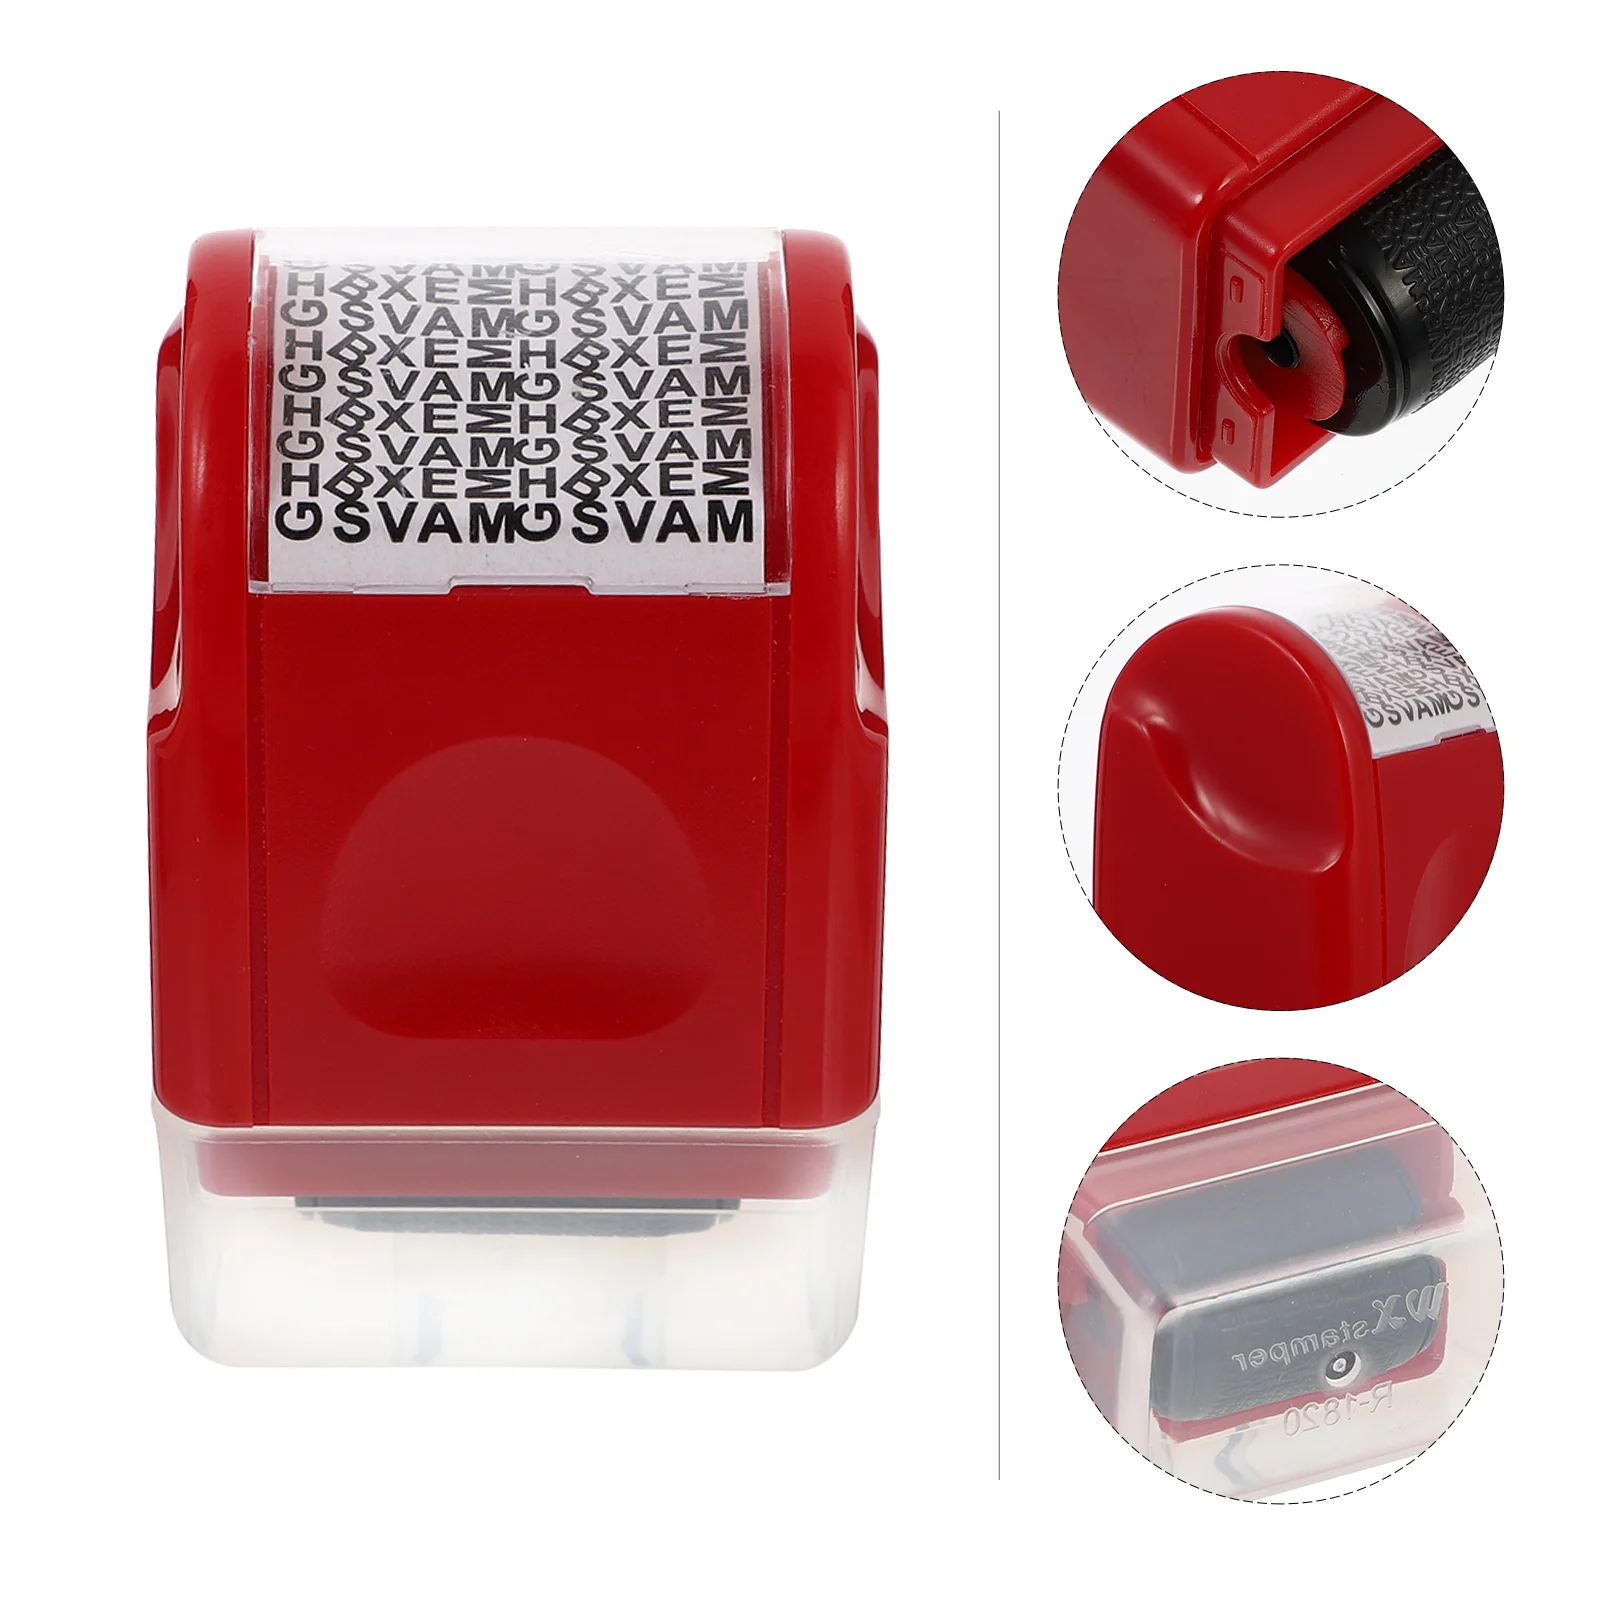 

The Name Stamp Confidentiality Seal Personal Private Anti-counterfeiting Security